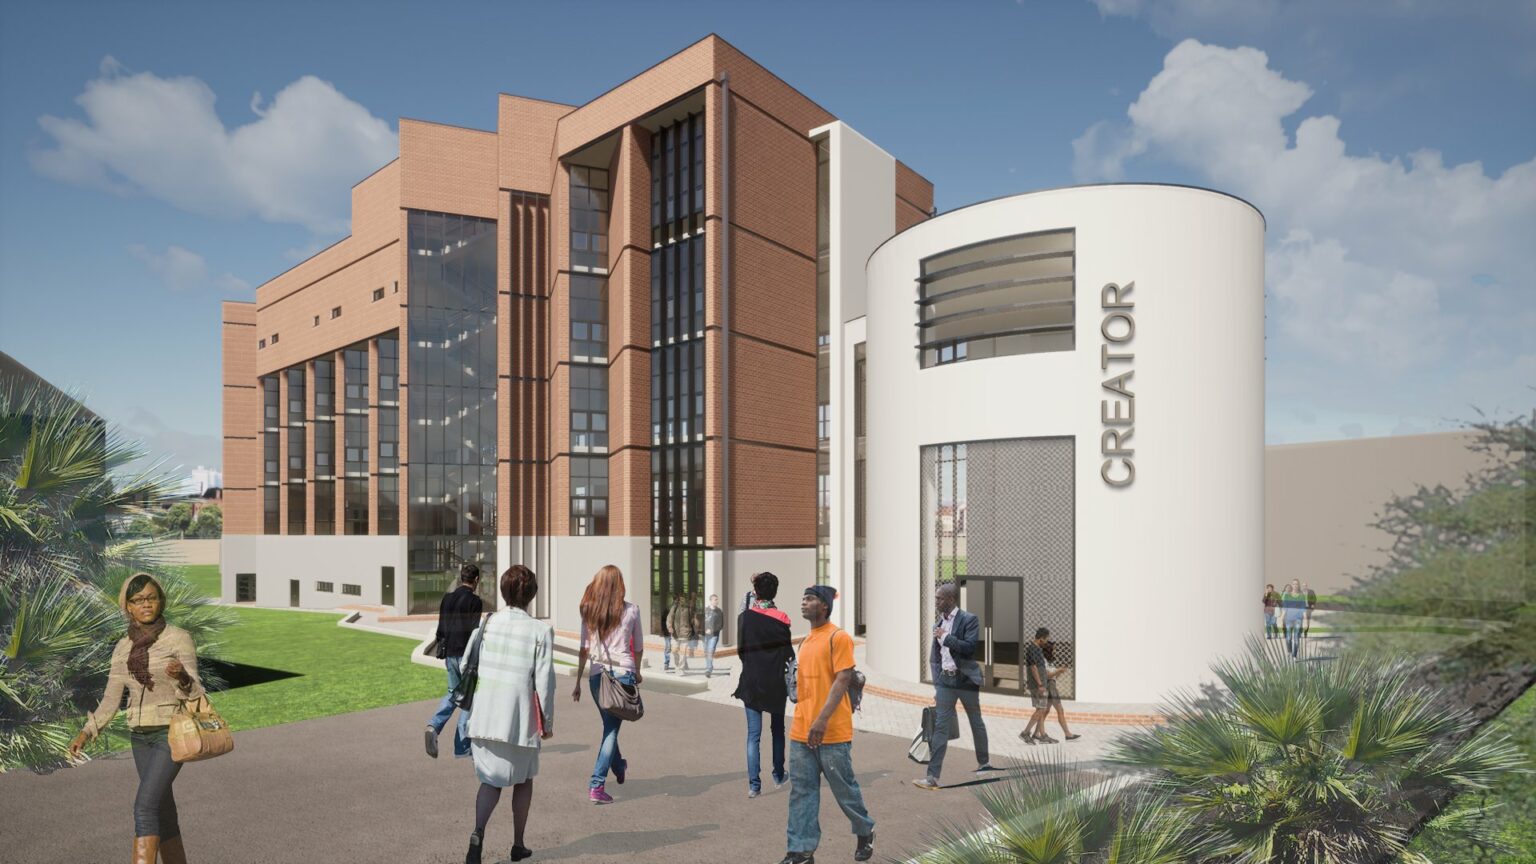 Work has begun on £9.5million specialist postgraduate medical & research training centre in Malawi